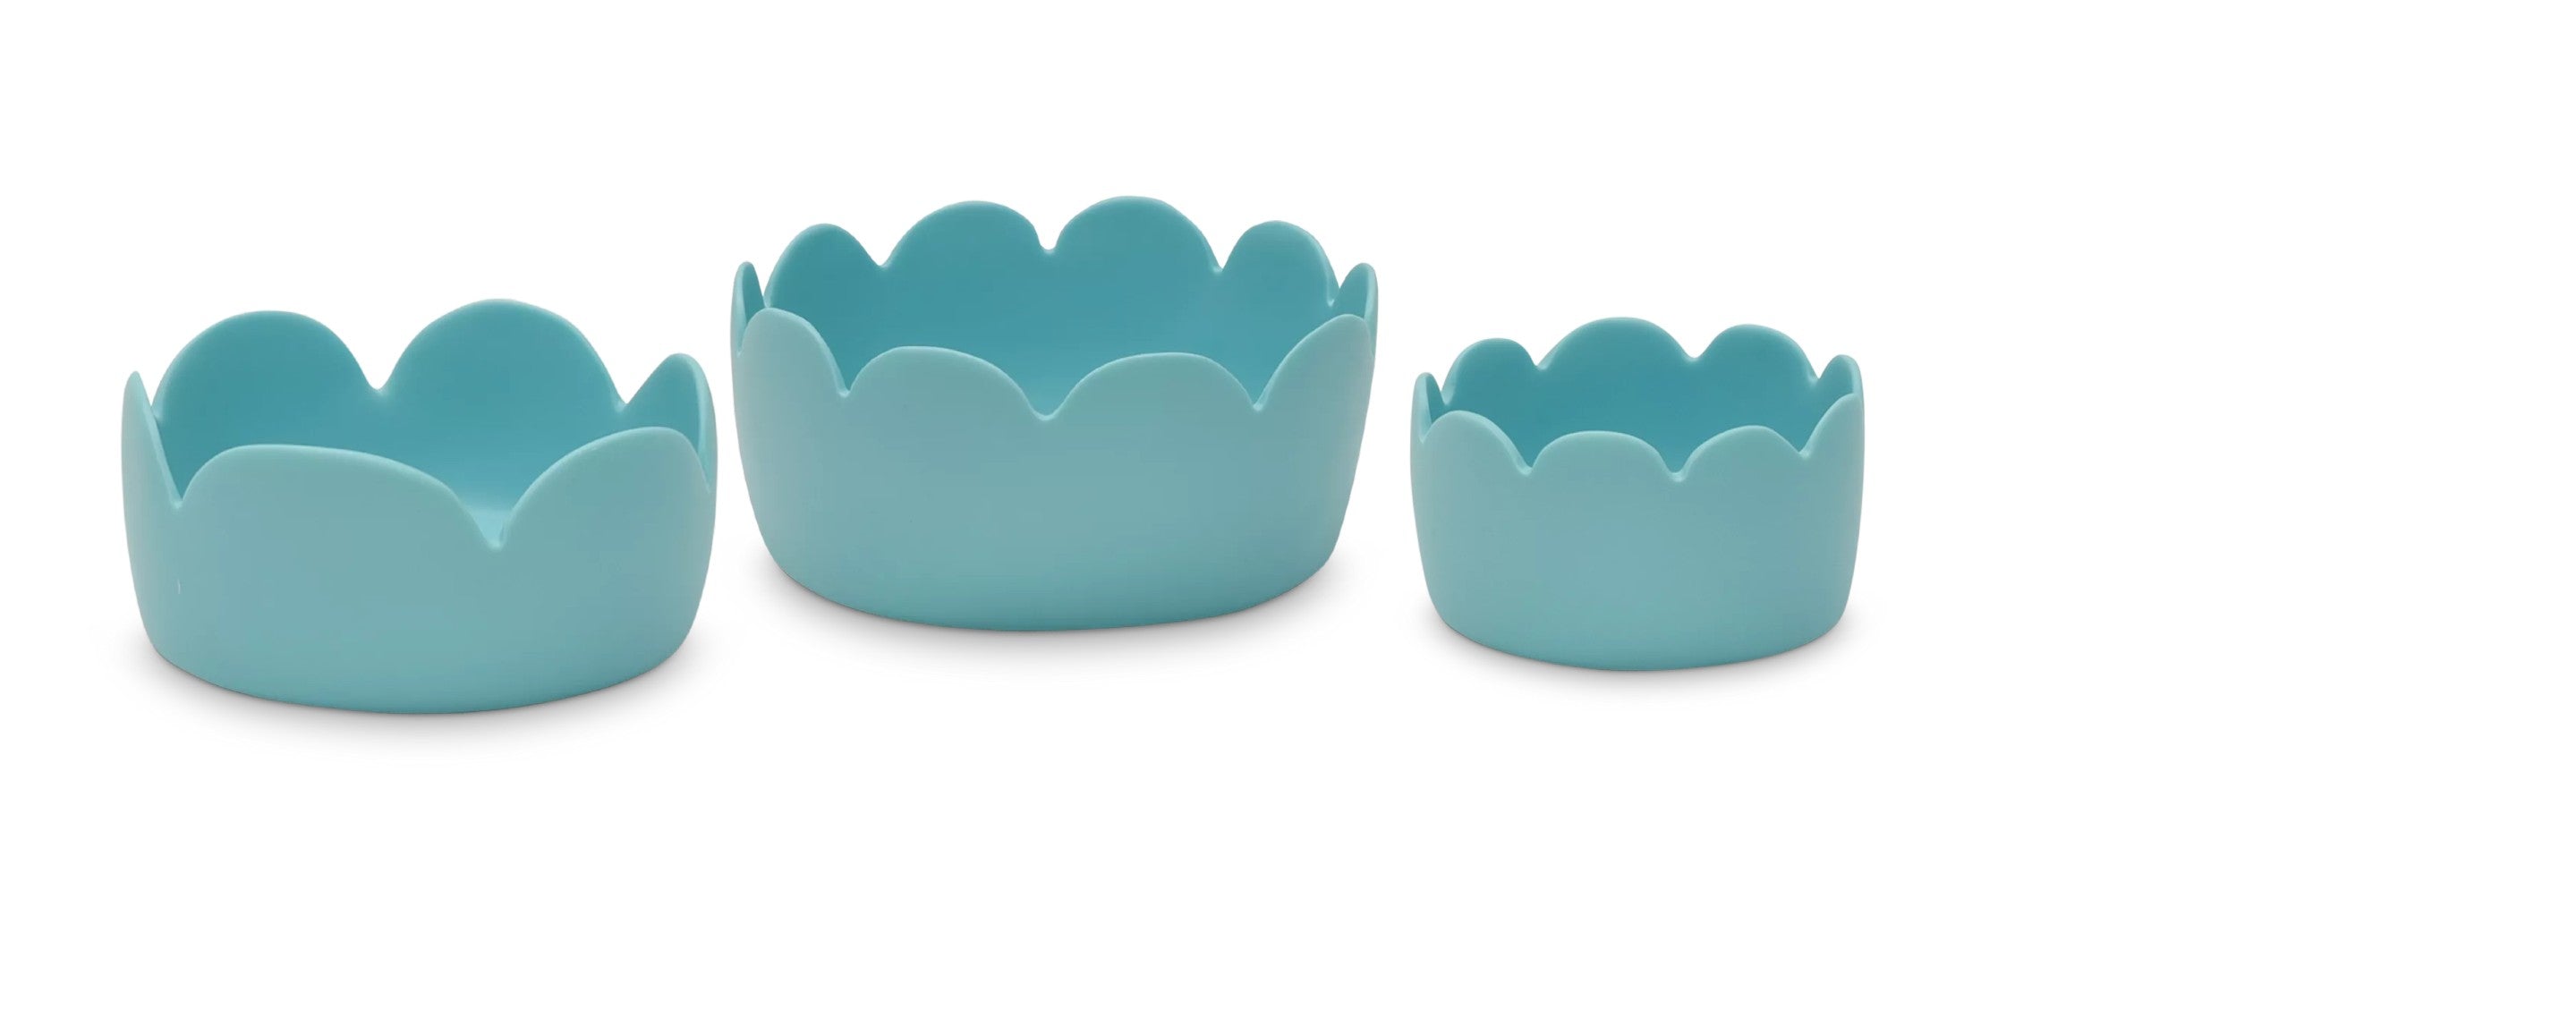 resin fleur turquoise bowl collection by tina frey